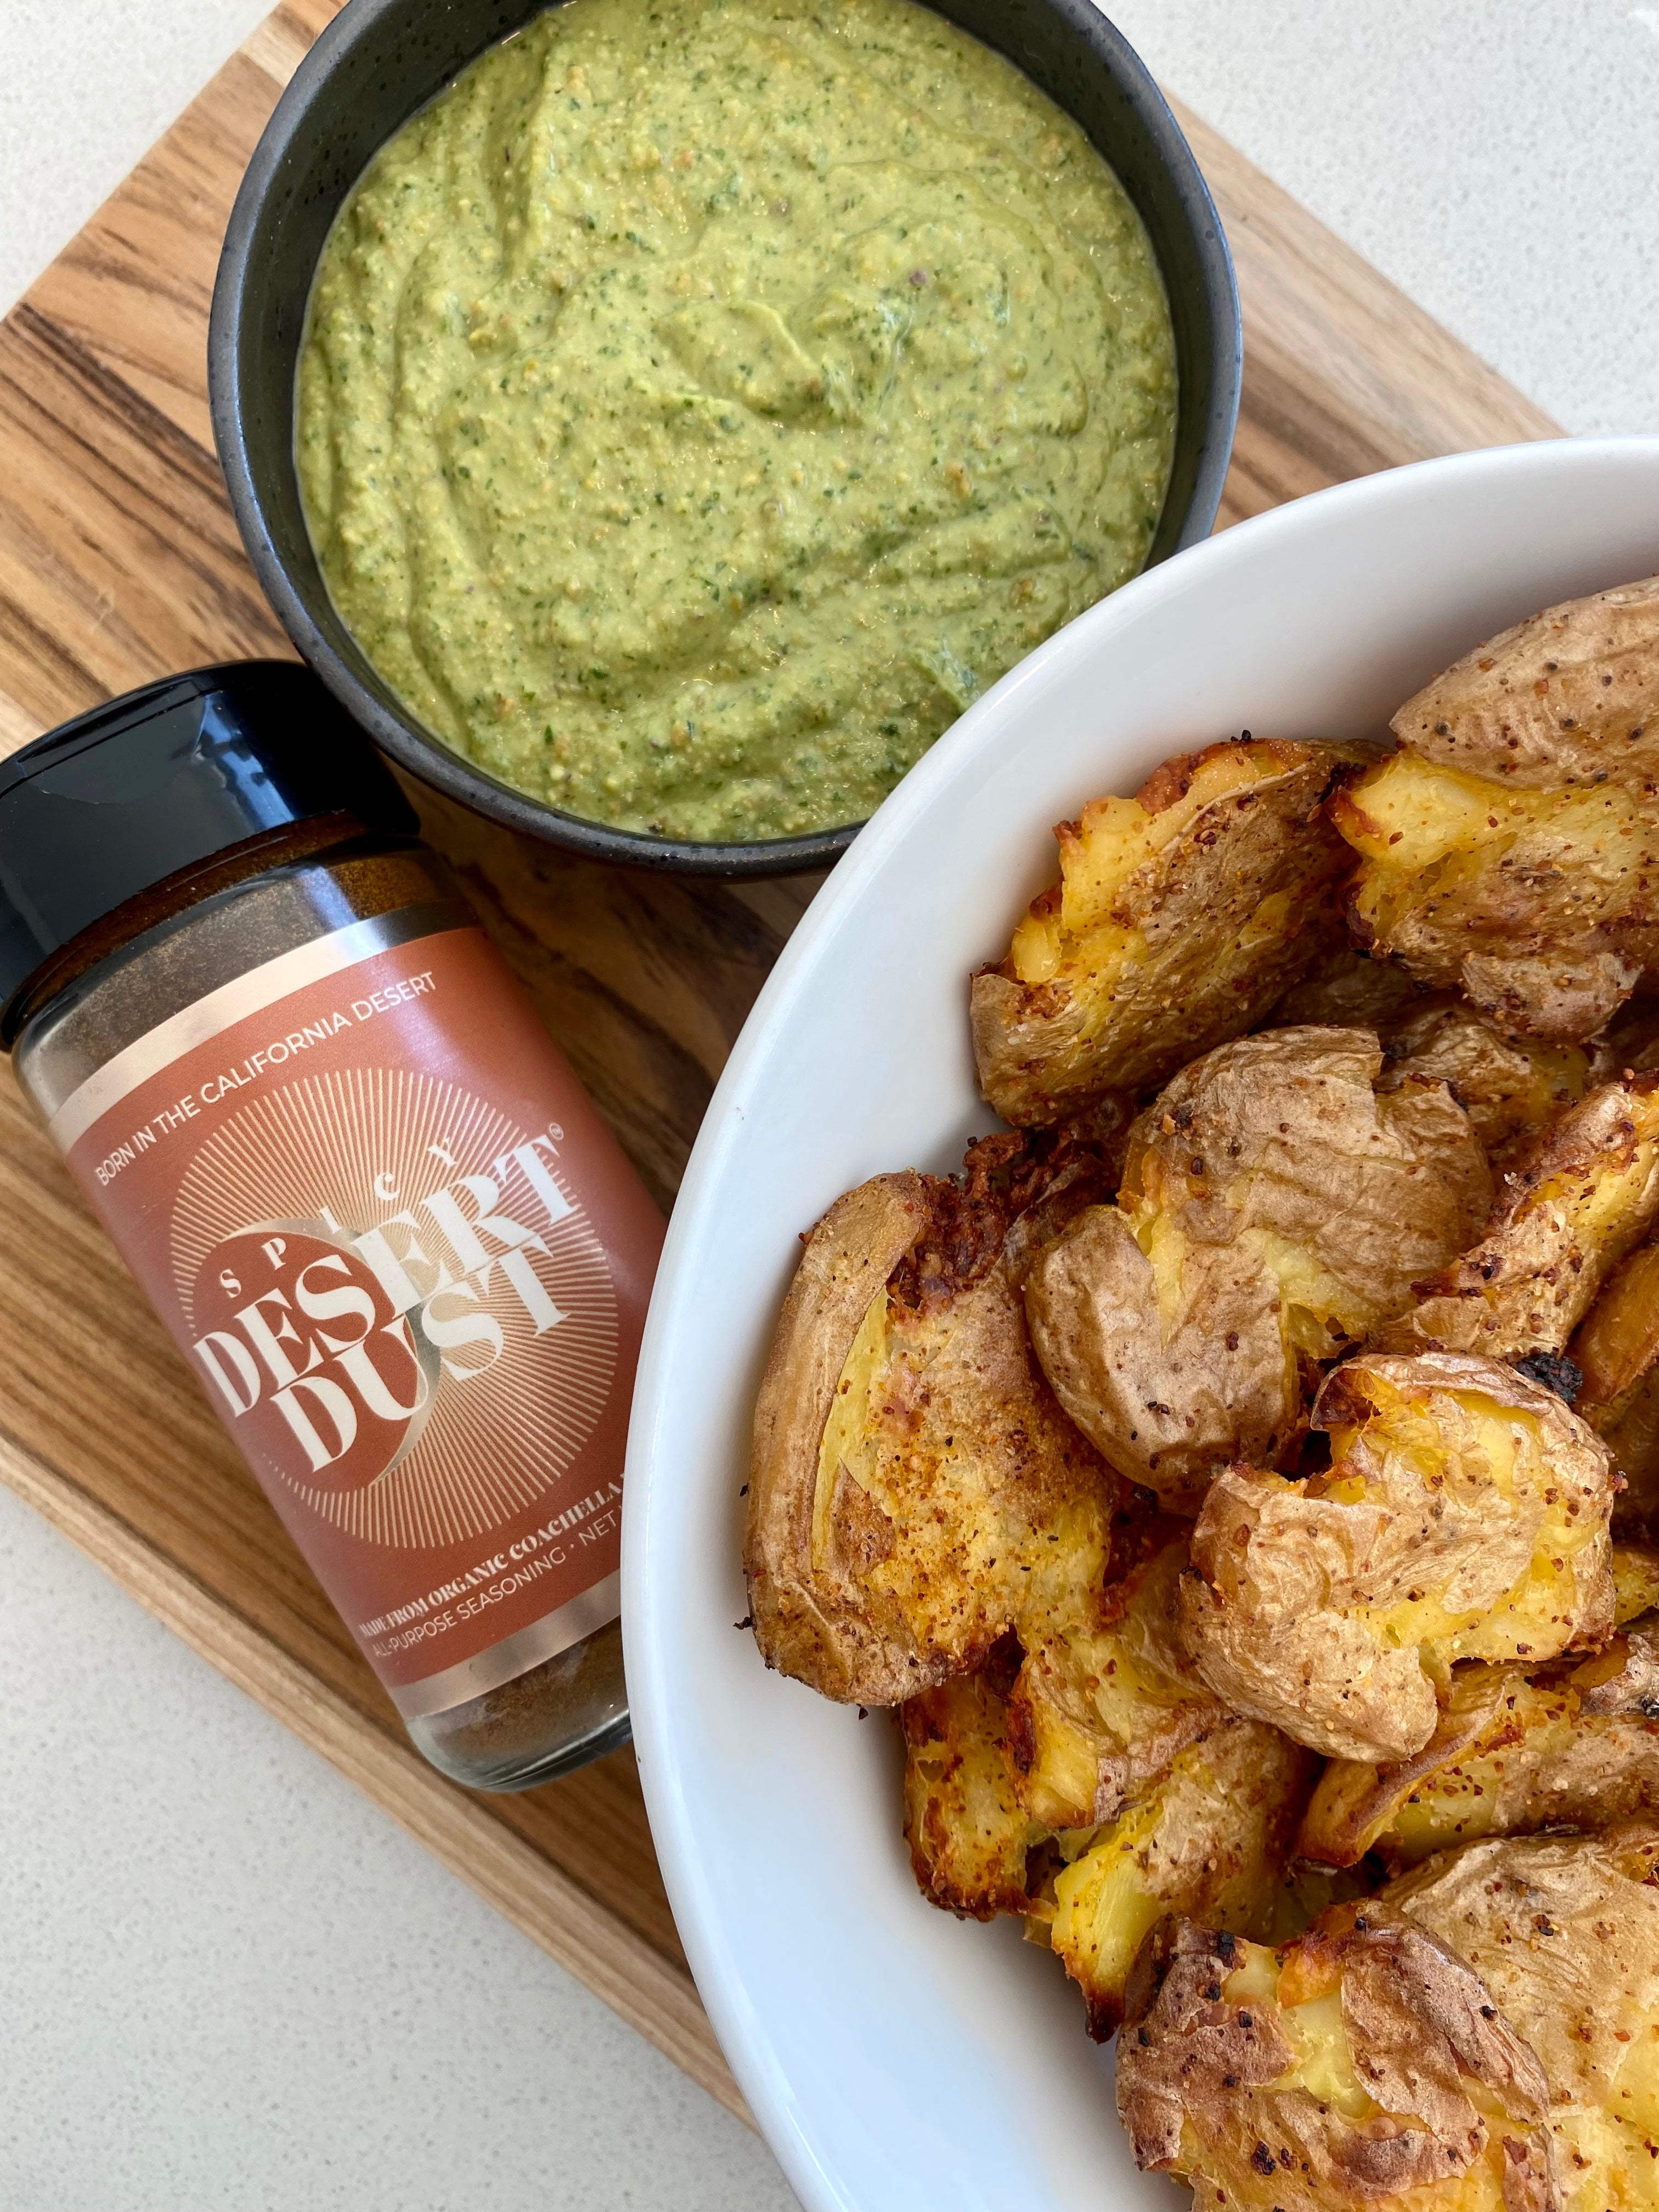 Smashed Potatoes with Spicy Desert Dust and Creamy Green Sauce